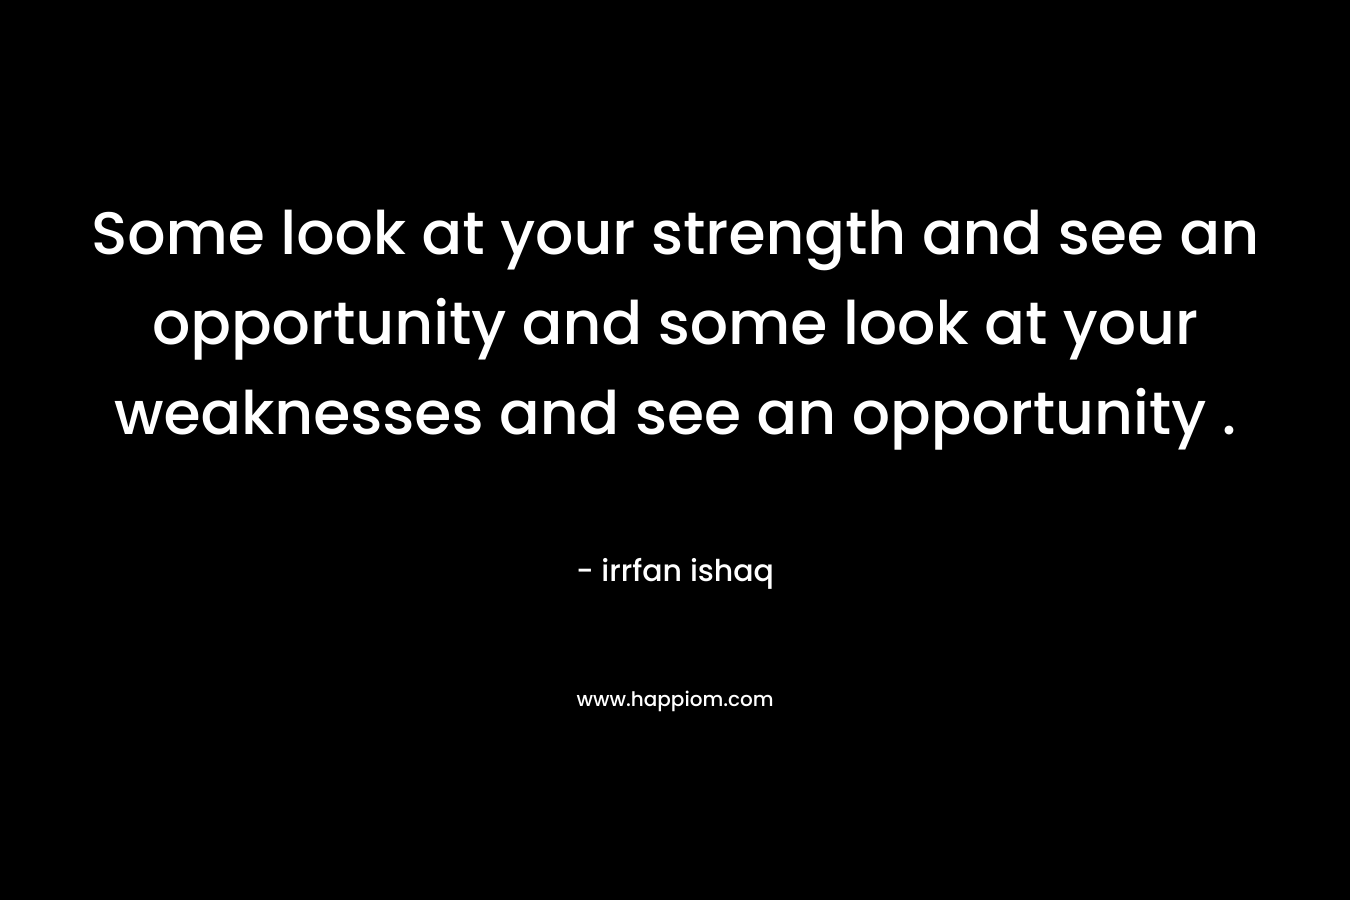 Some look at your strength and see an opportunity and some look at your weaknesses and see an opportunity .